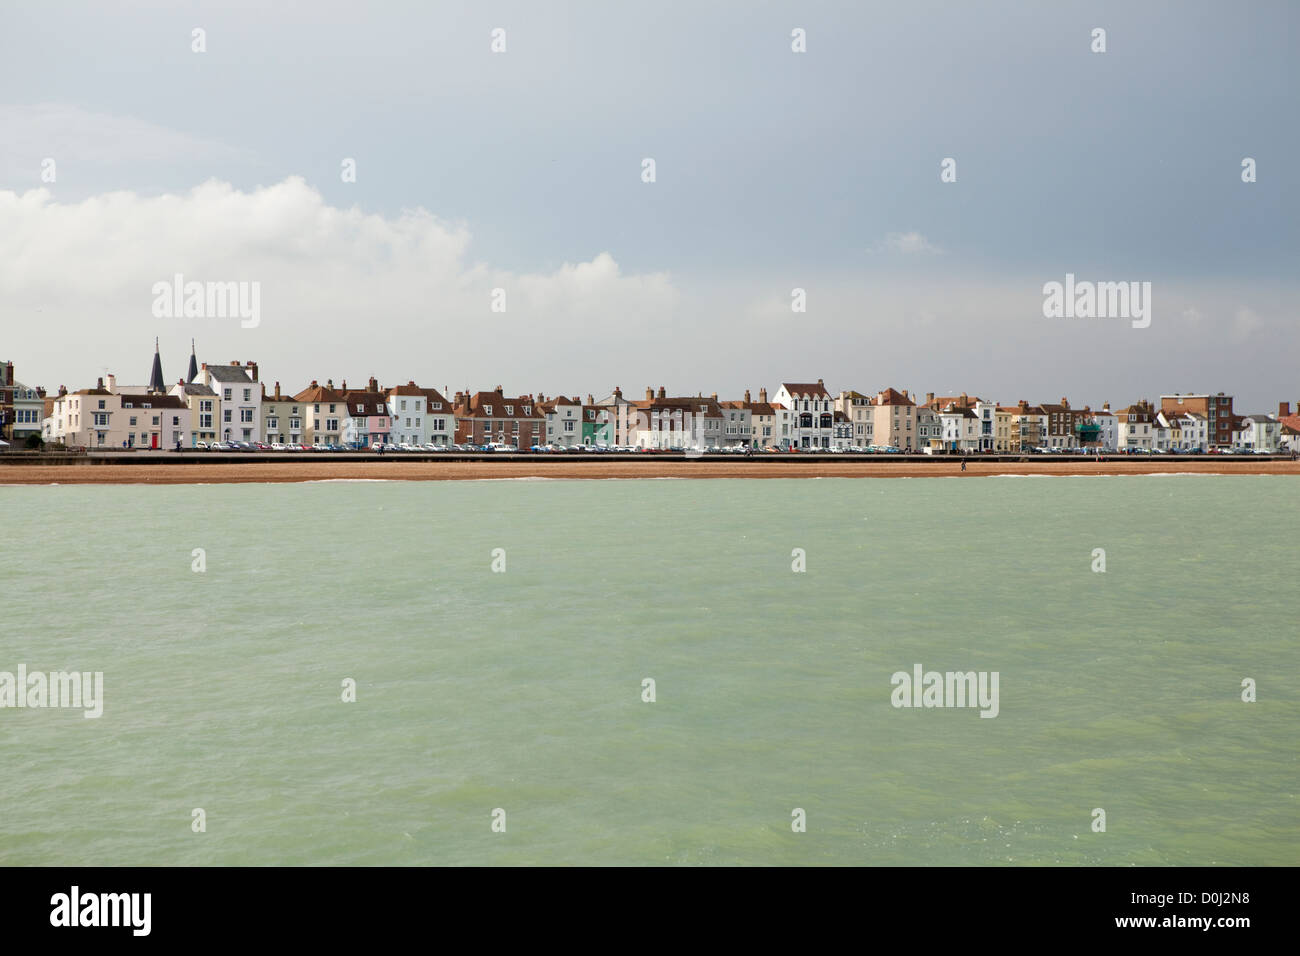 A view of the traditional cinque port town of Deal from the Pier. Stock Photo